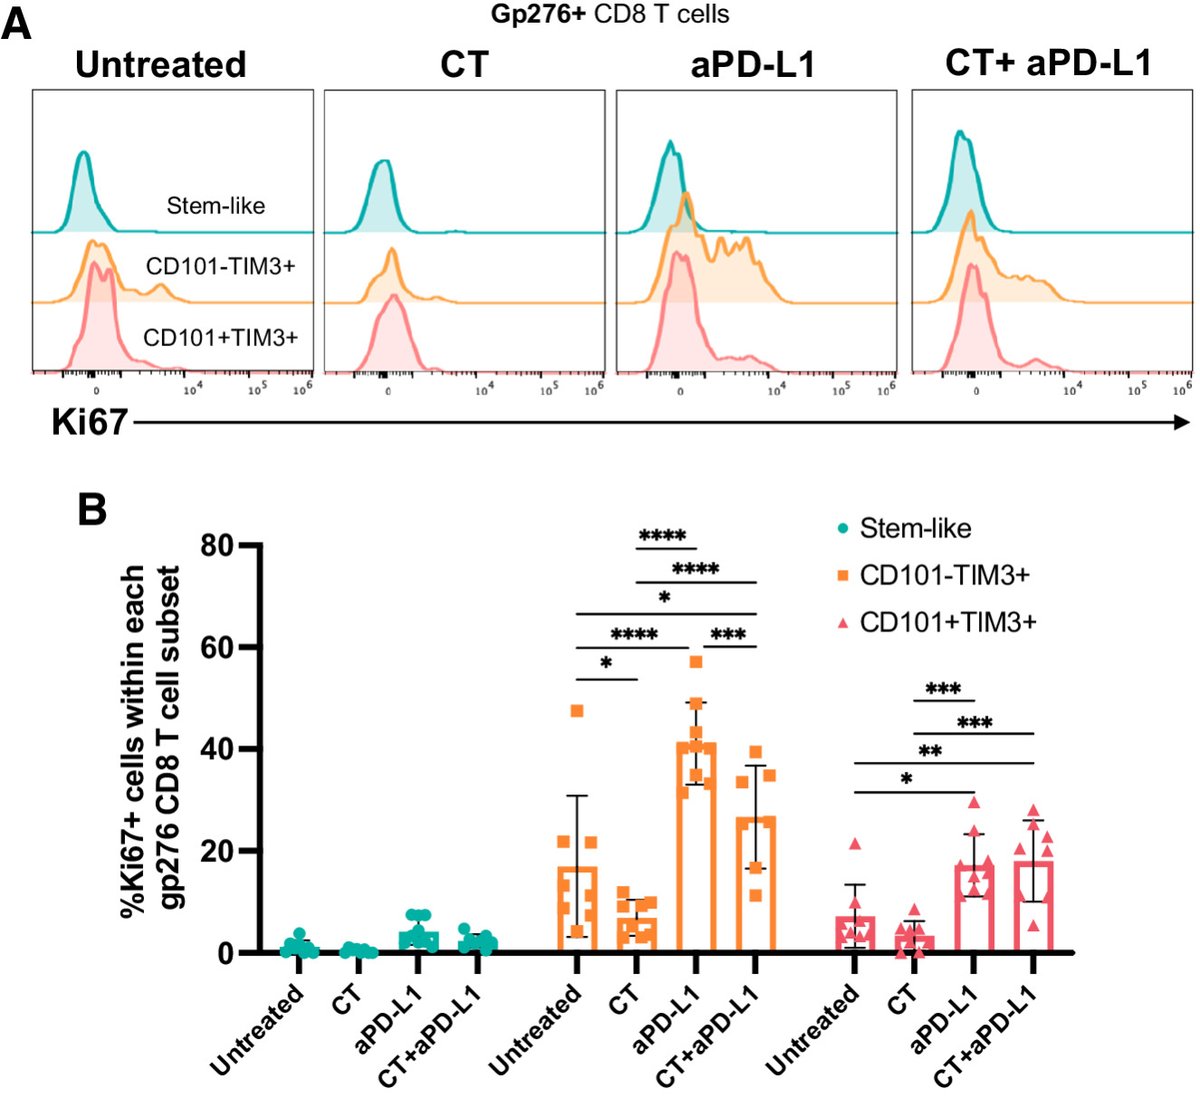 Platinum-Based #Chemotherapy Attenuates the Effector Response of CD8 T Cells to Concomitant PD-1 Blockade. bit.ly/4bi90ci